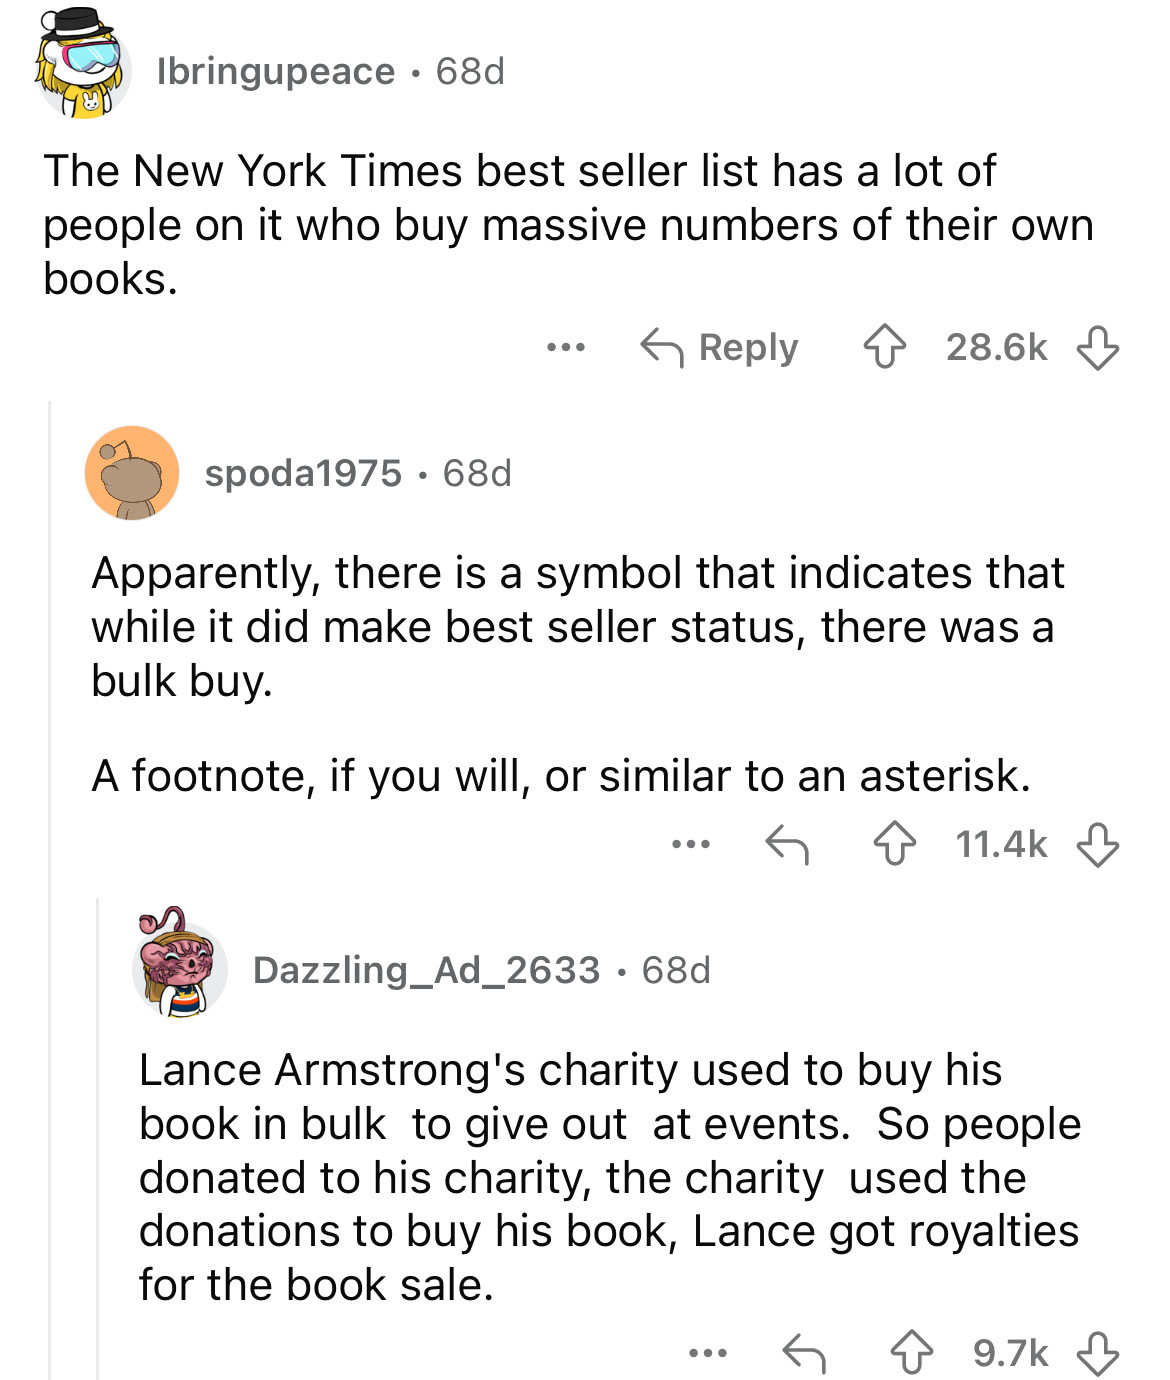 screenshot - Ibringupeace 68d The New York Times best seller list has a lot of people on it who buy massive numbers of their own books. spoda1975 68d ... Apparently, there is a symbol that indicates that while it did make best seller status, there was a b